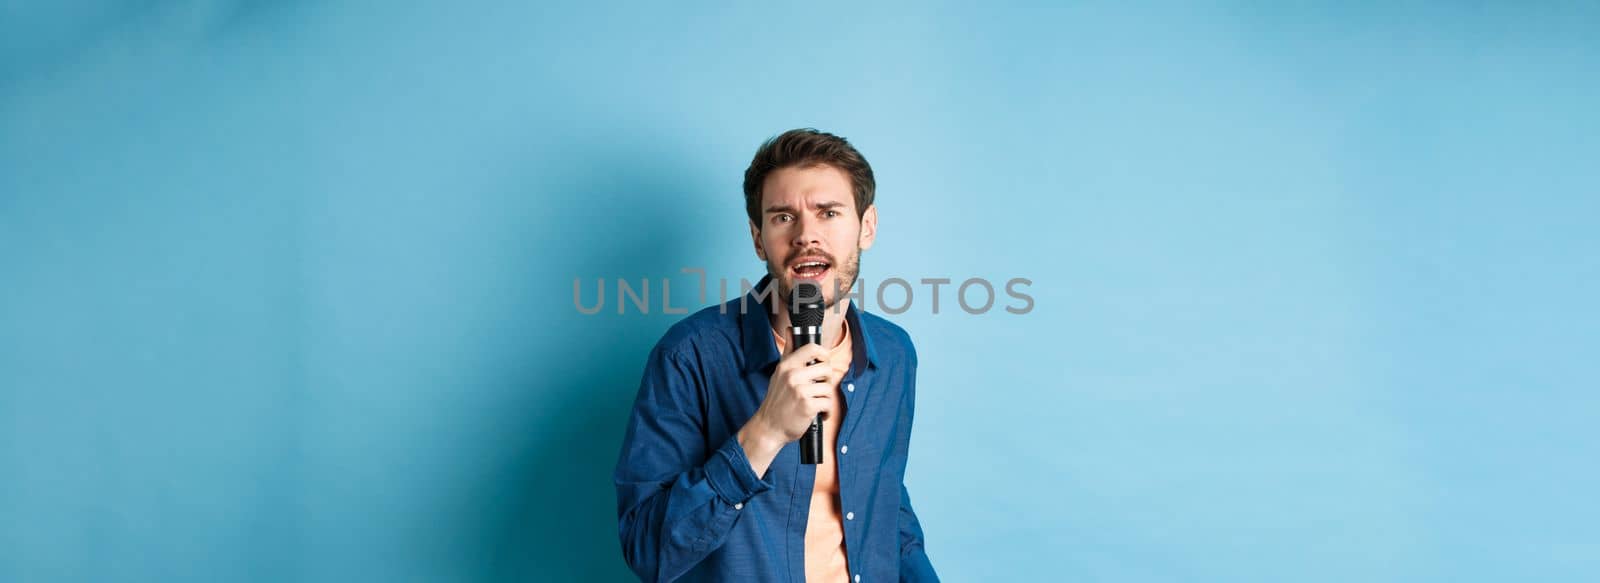 Passionate singer looking at camera, singing in microphone, playing karaoke on blue background. Copy space